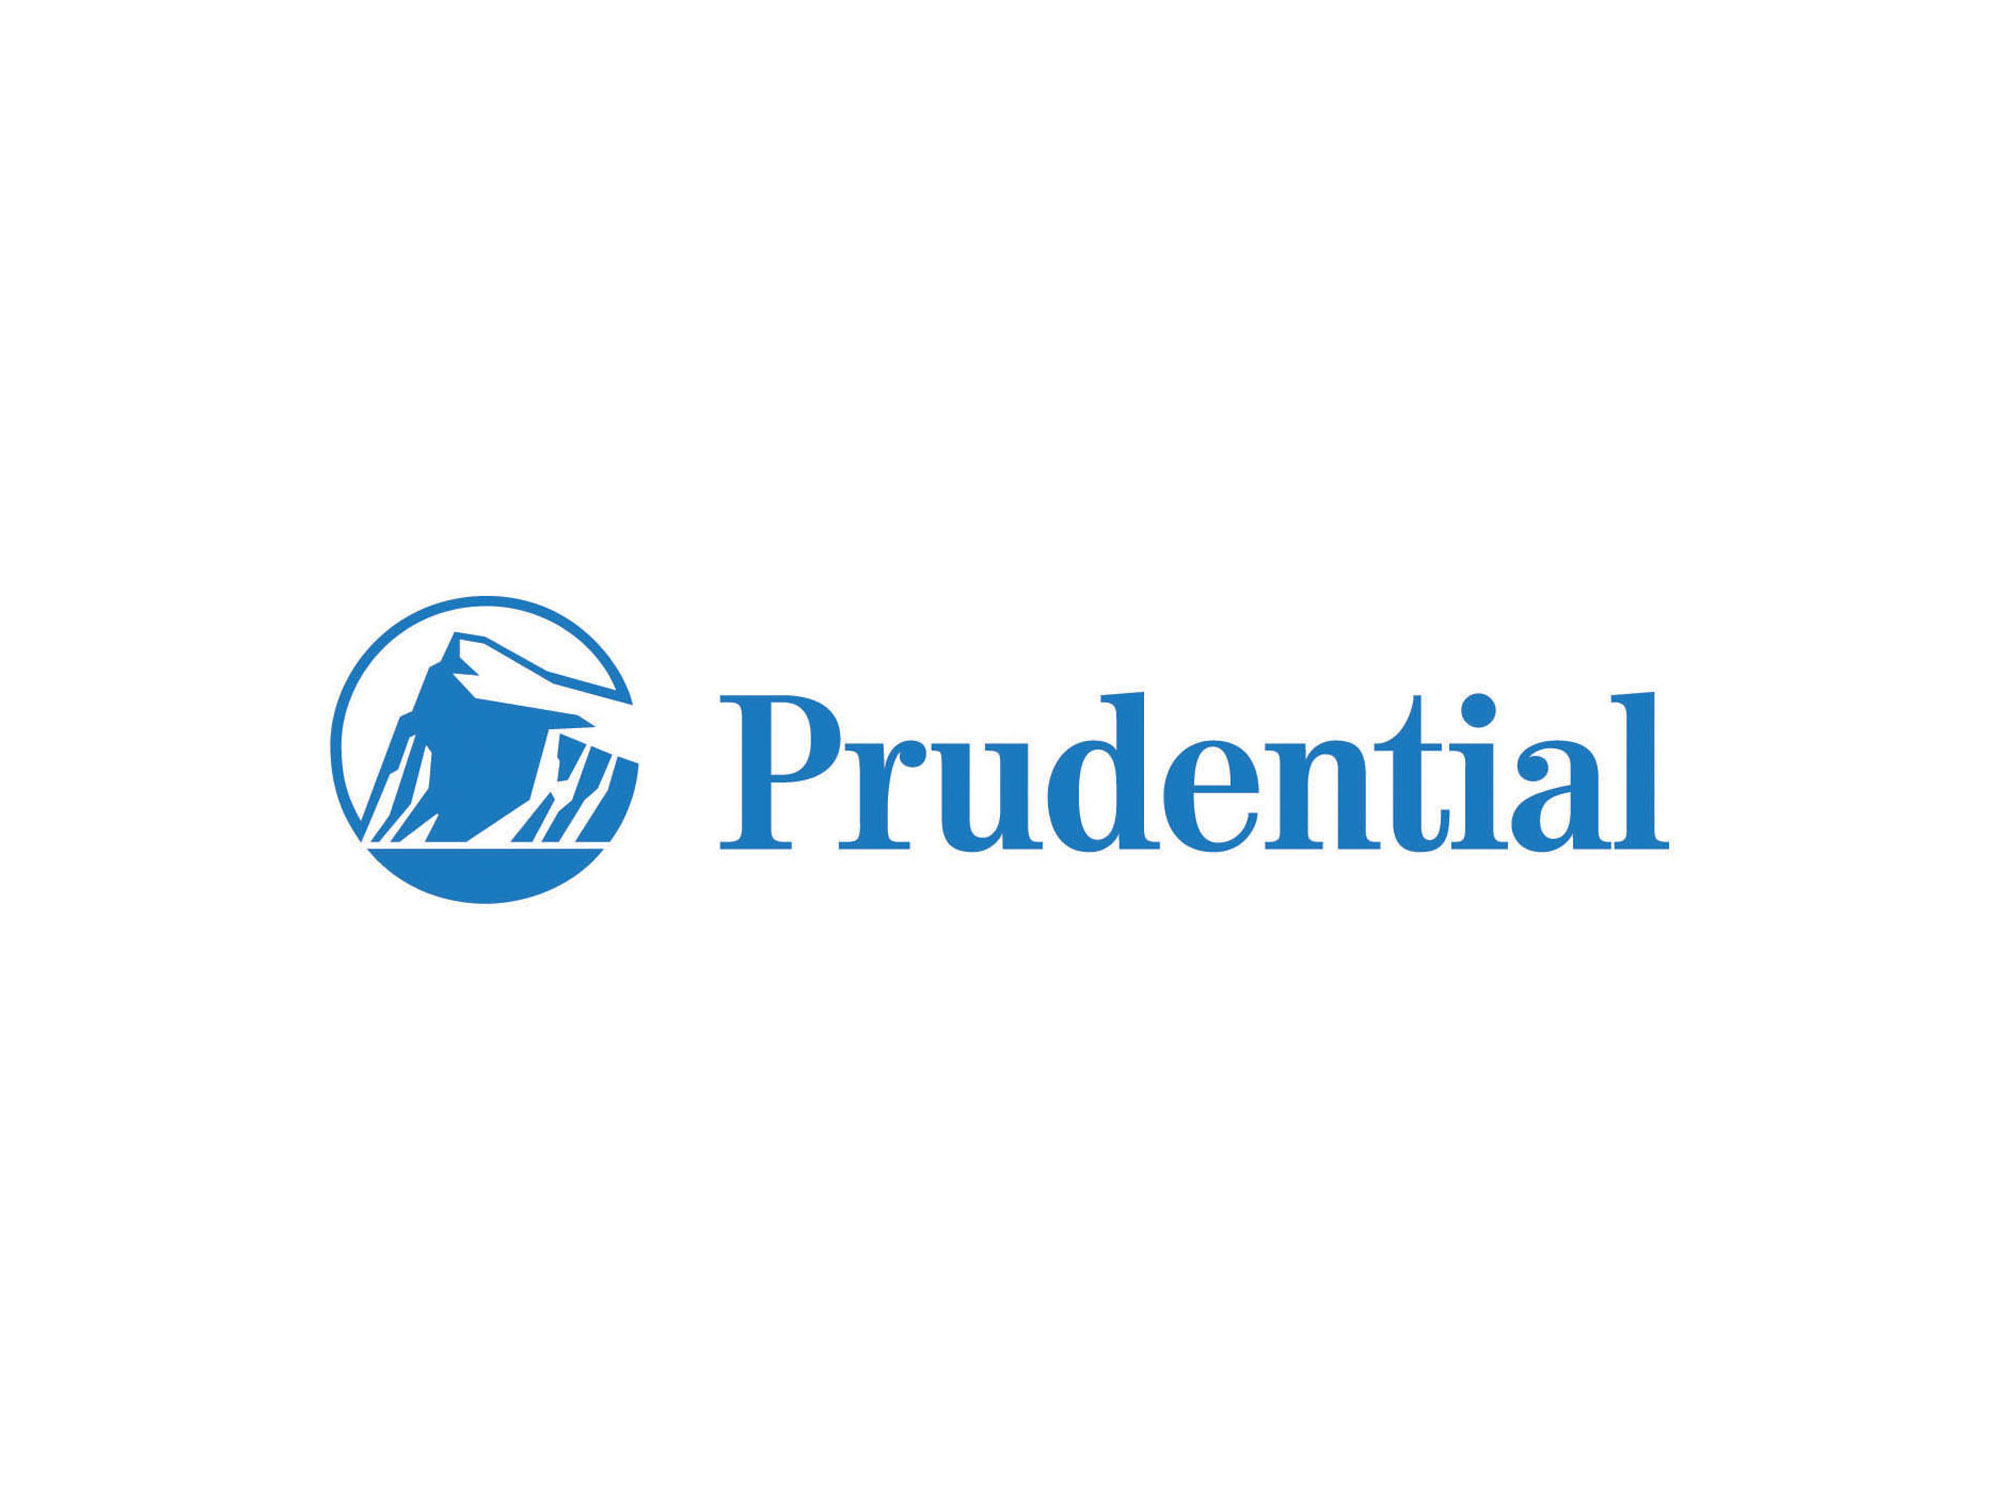 Prudential quits individual longterm care biz CBS News